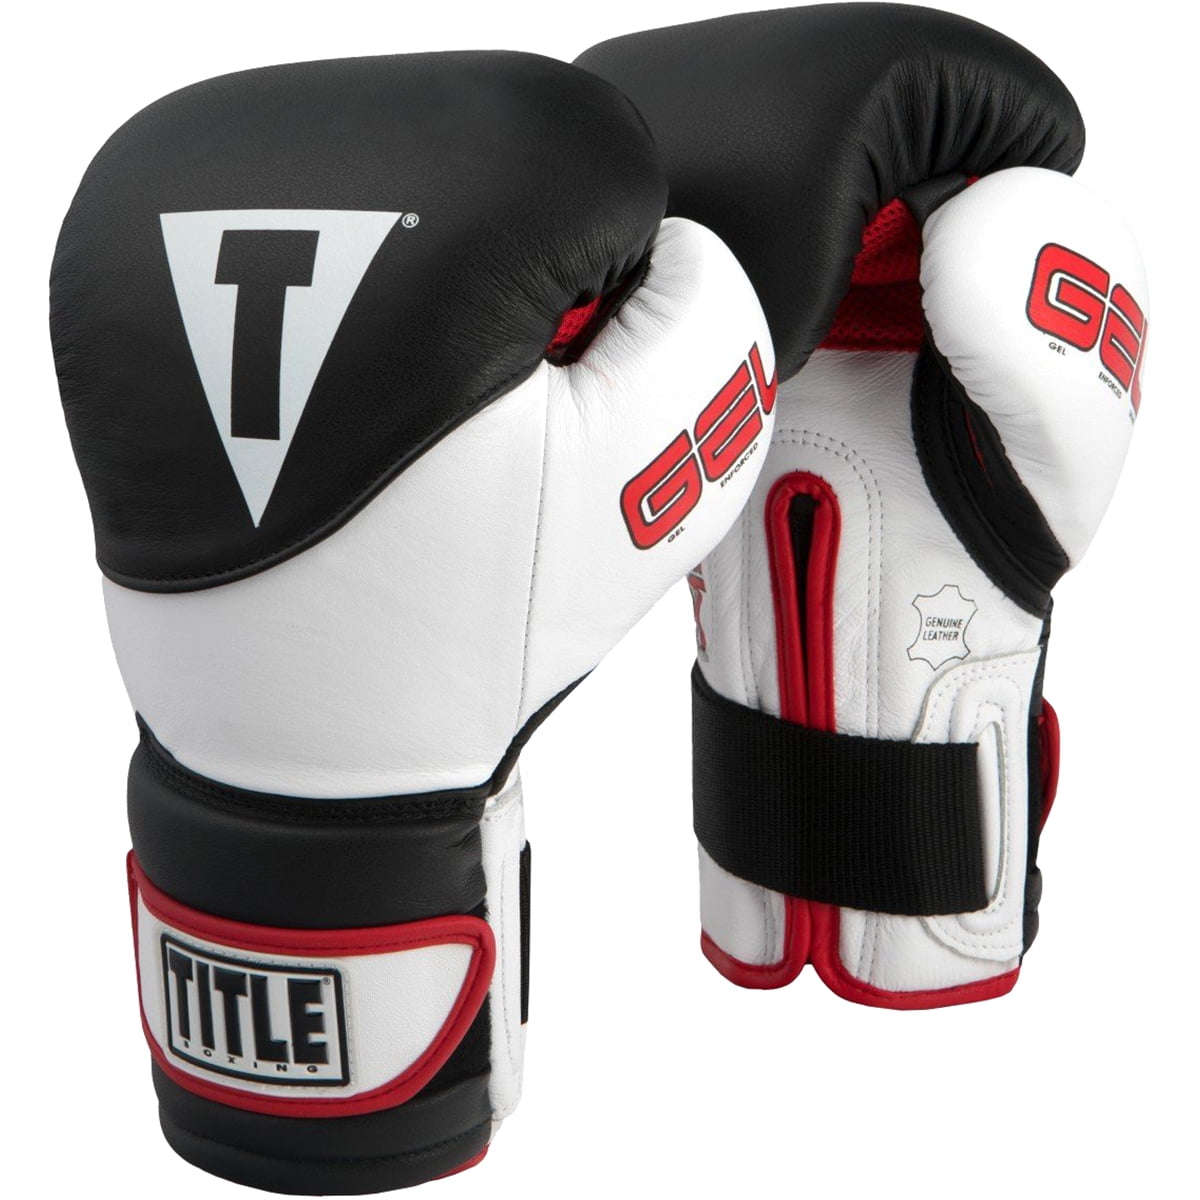 Cleto Reyes Training Boxing Sparring Gloves Pure Cowhide Leather Free Shipping 